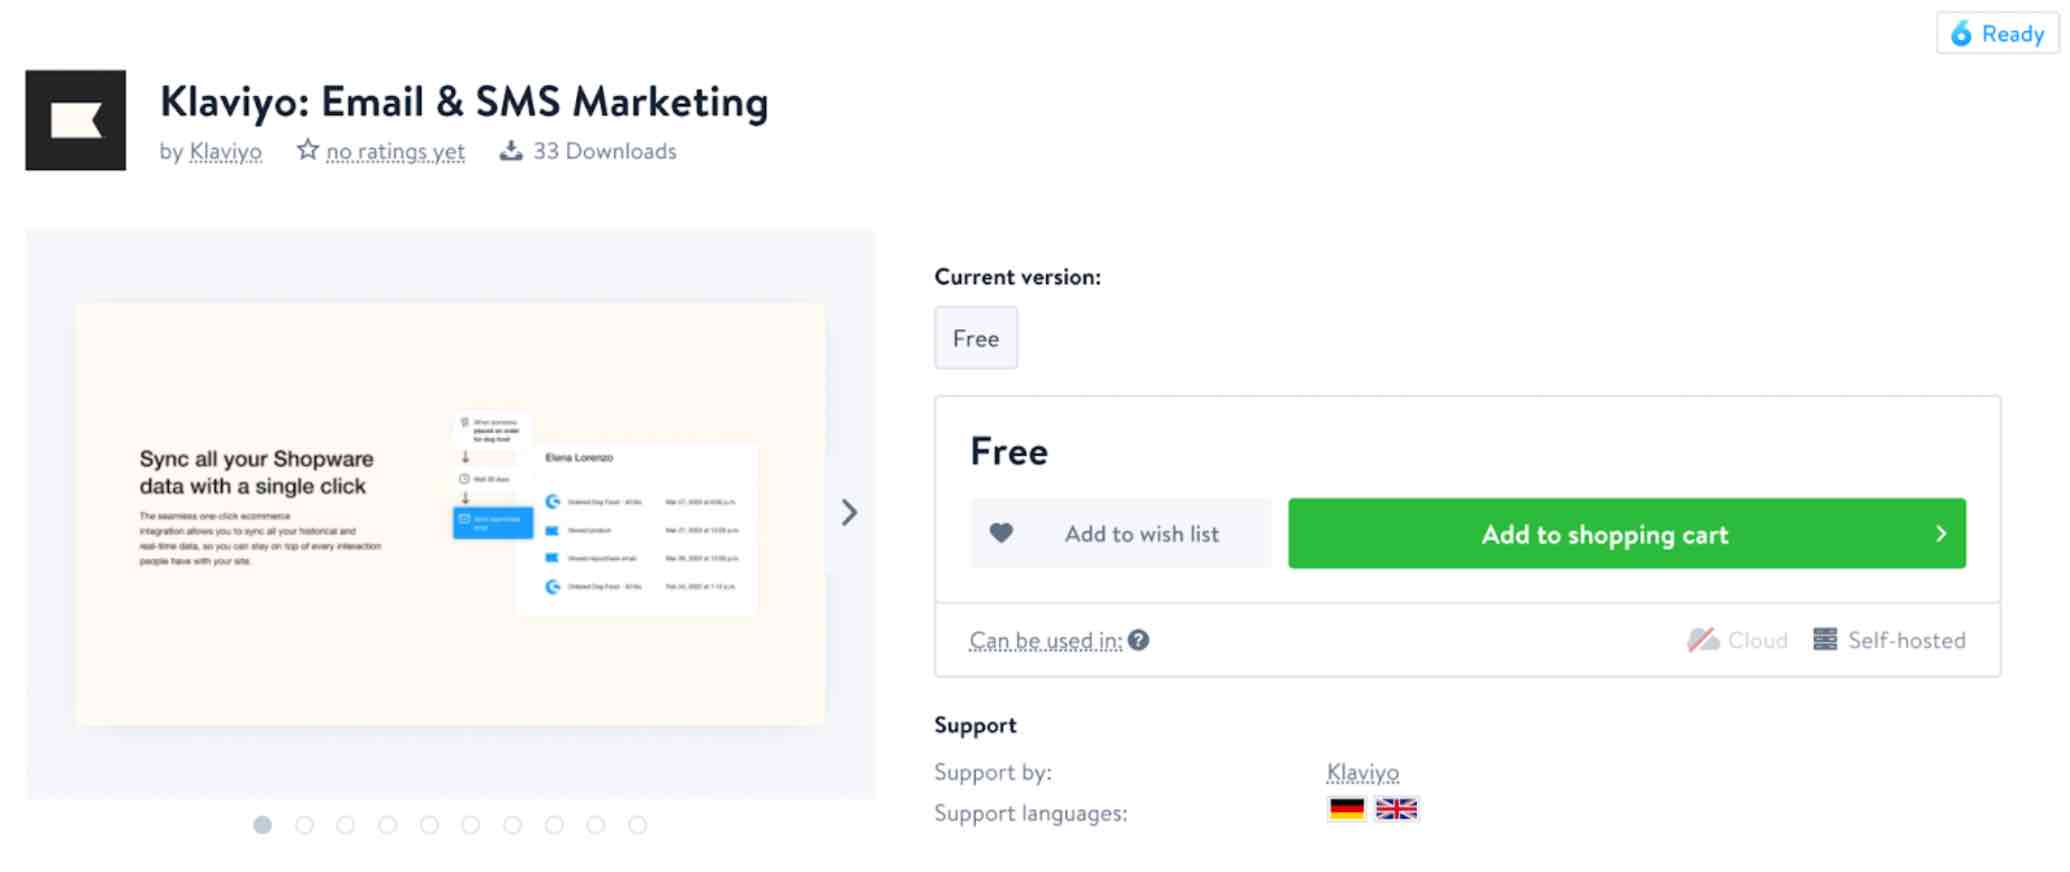 Klaviyo: Email & SMS Marketing with Add to shopping cart with green background